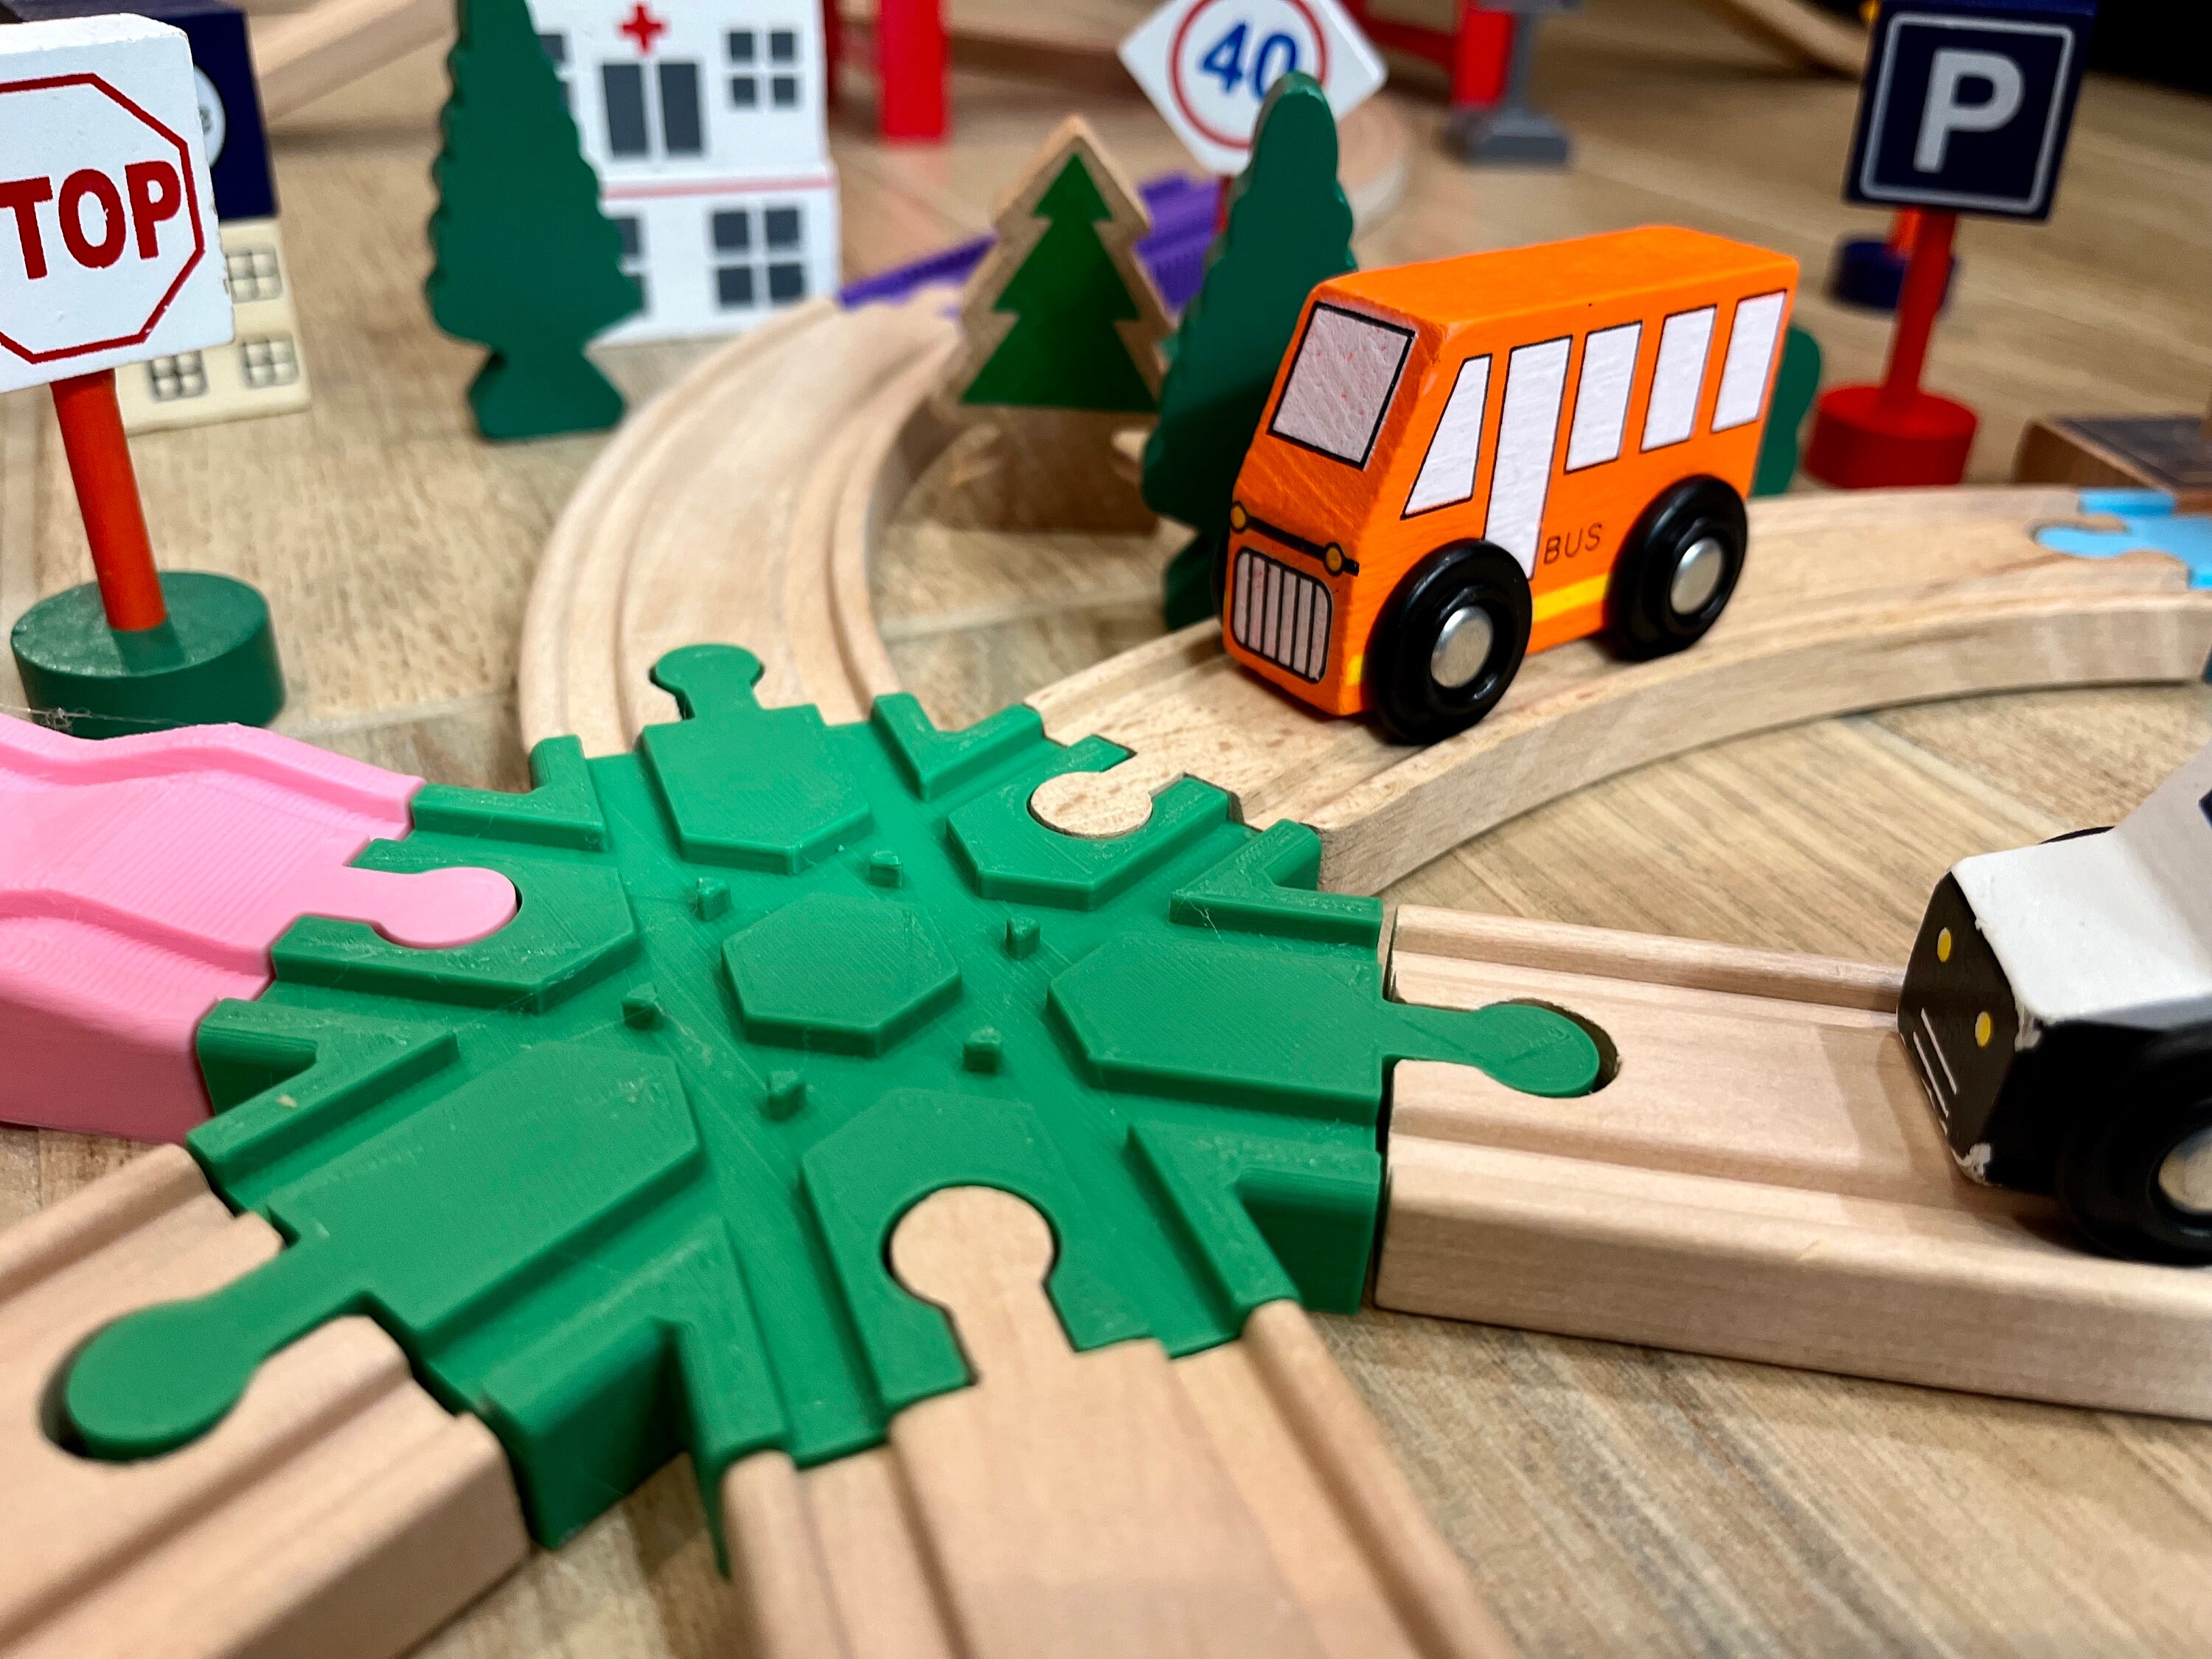 Personalized Wooden Train Track Compatible With Brio, Thomas the Train, Hape,  and IKEA Trains. Montessori Toys for Kids, Pretend Play 